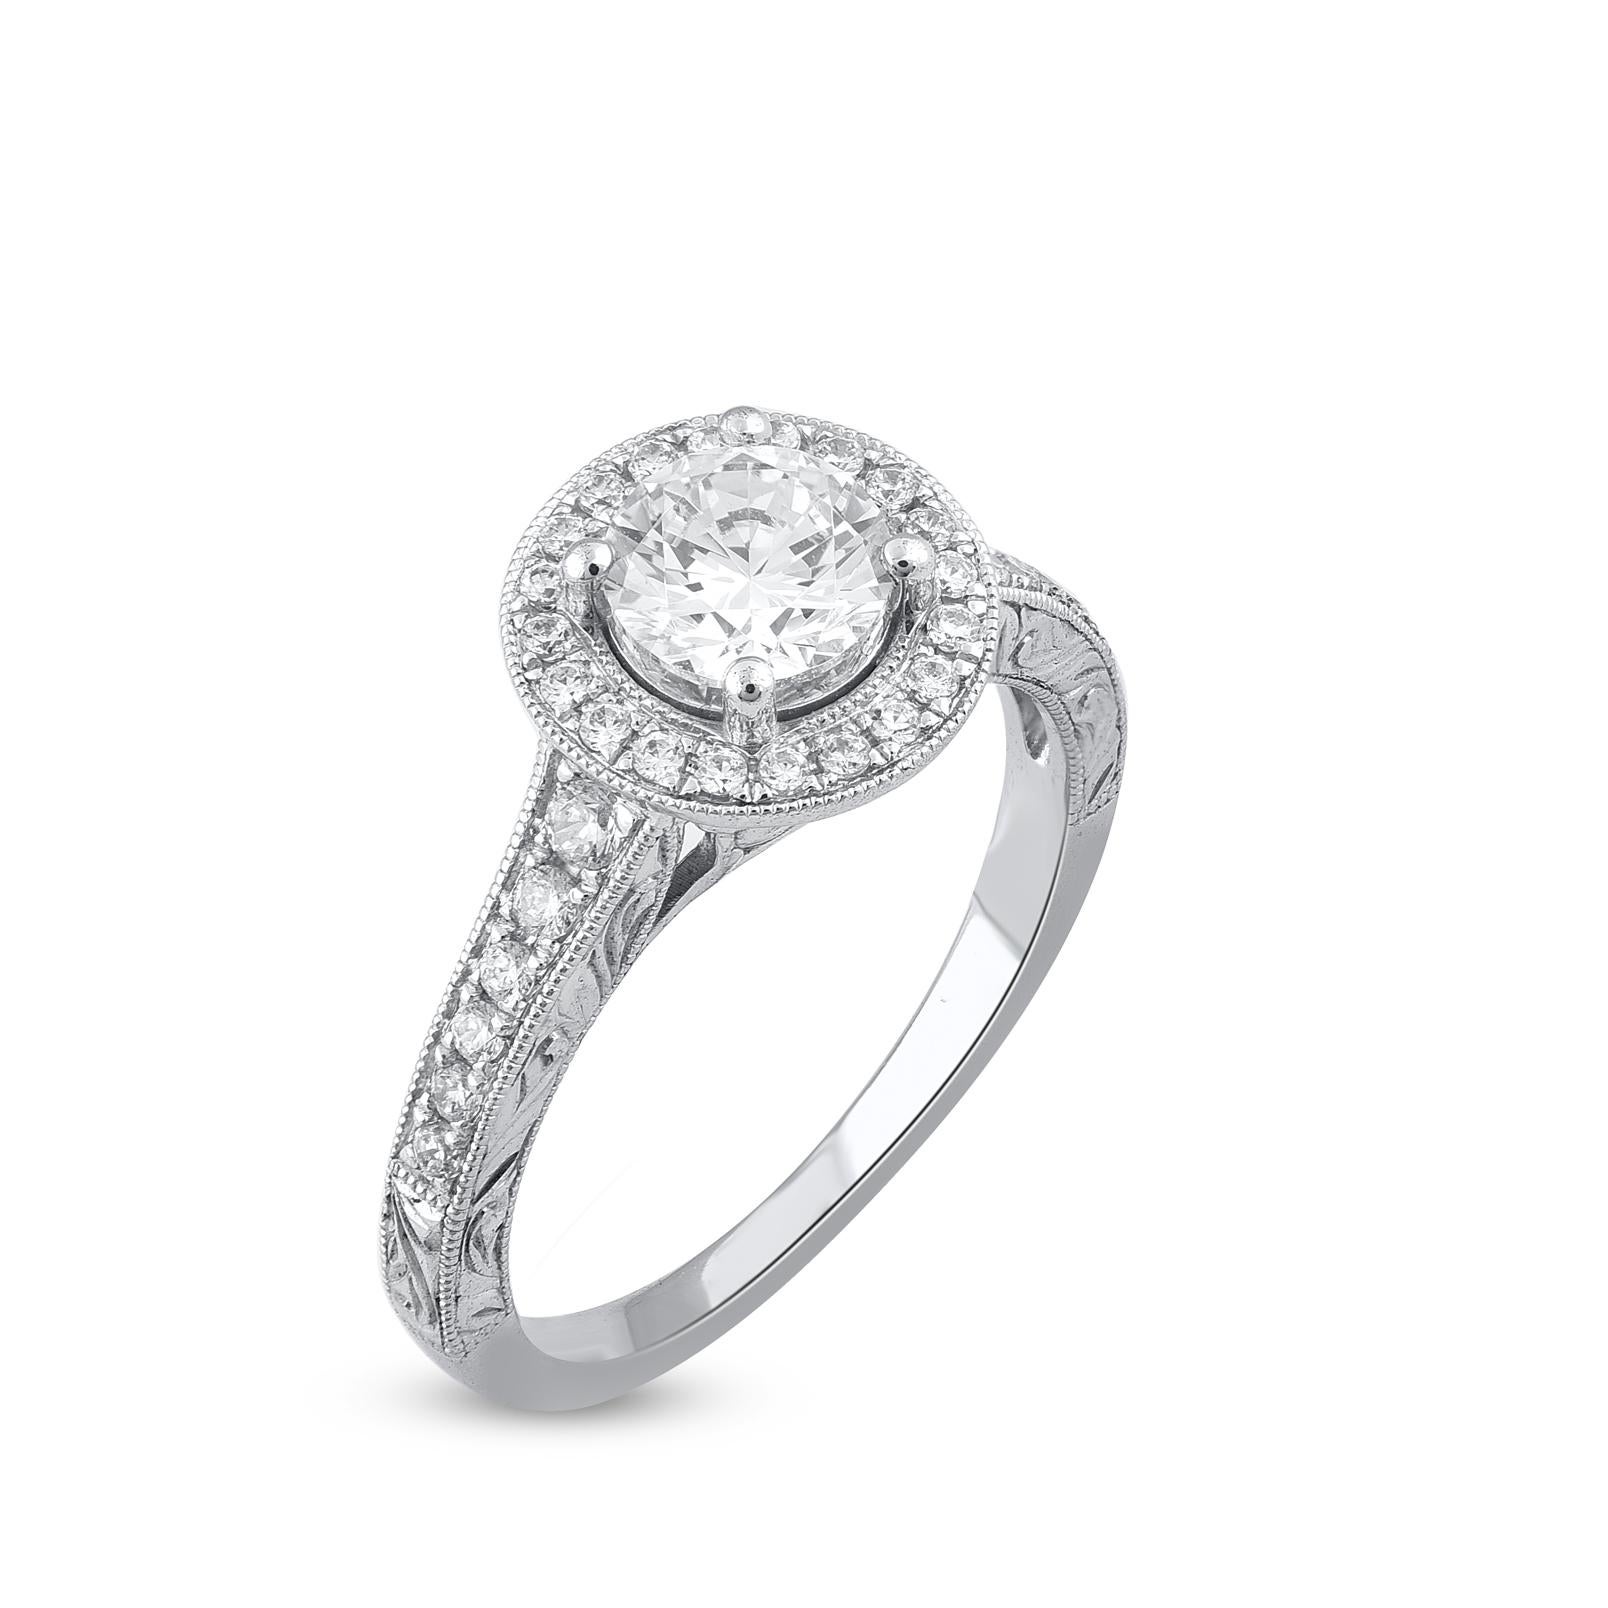 Stunning and classic, this diamond ring is beautifully crafted in 18 karat Solid White gold. The engagement ring features 0.80 ct. of center stone and 0.30 ct. diamond frame and shank lined sparkling white diamonds set in secured prong and